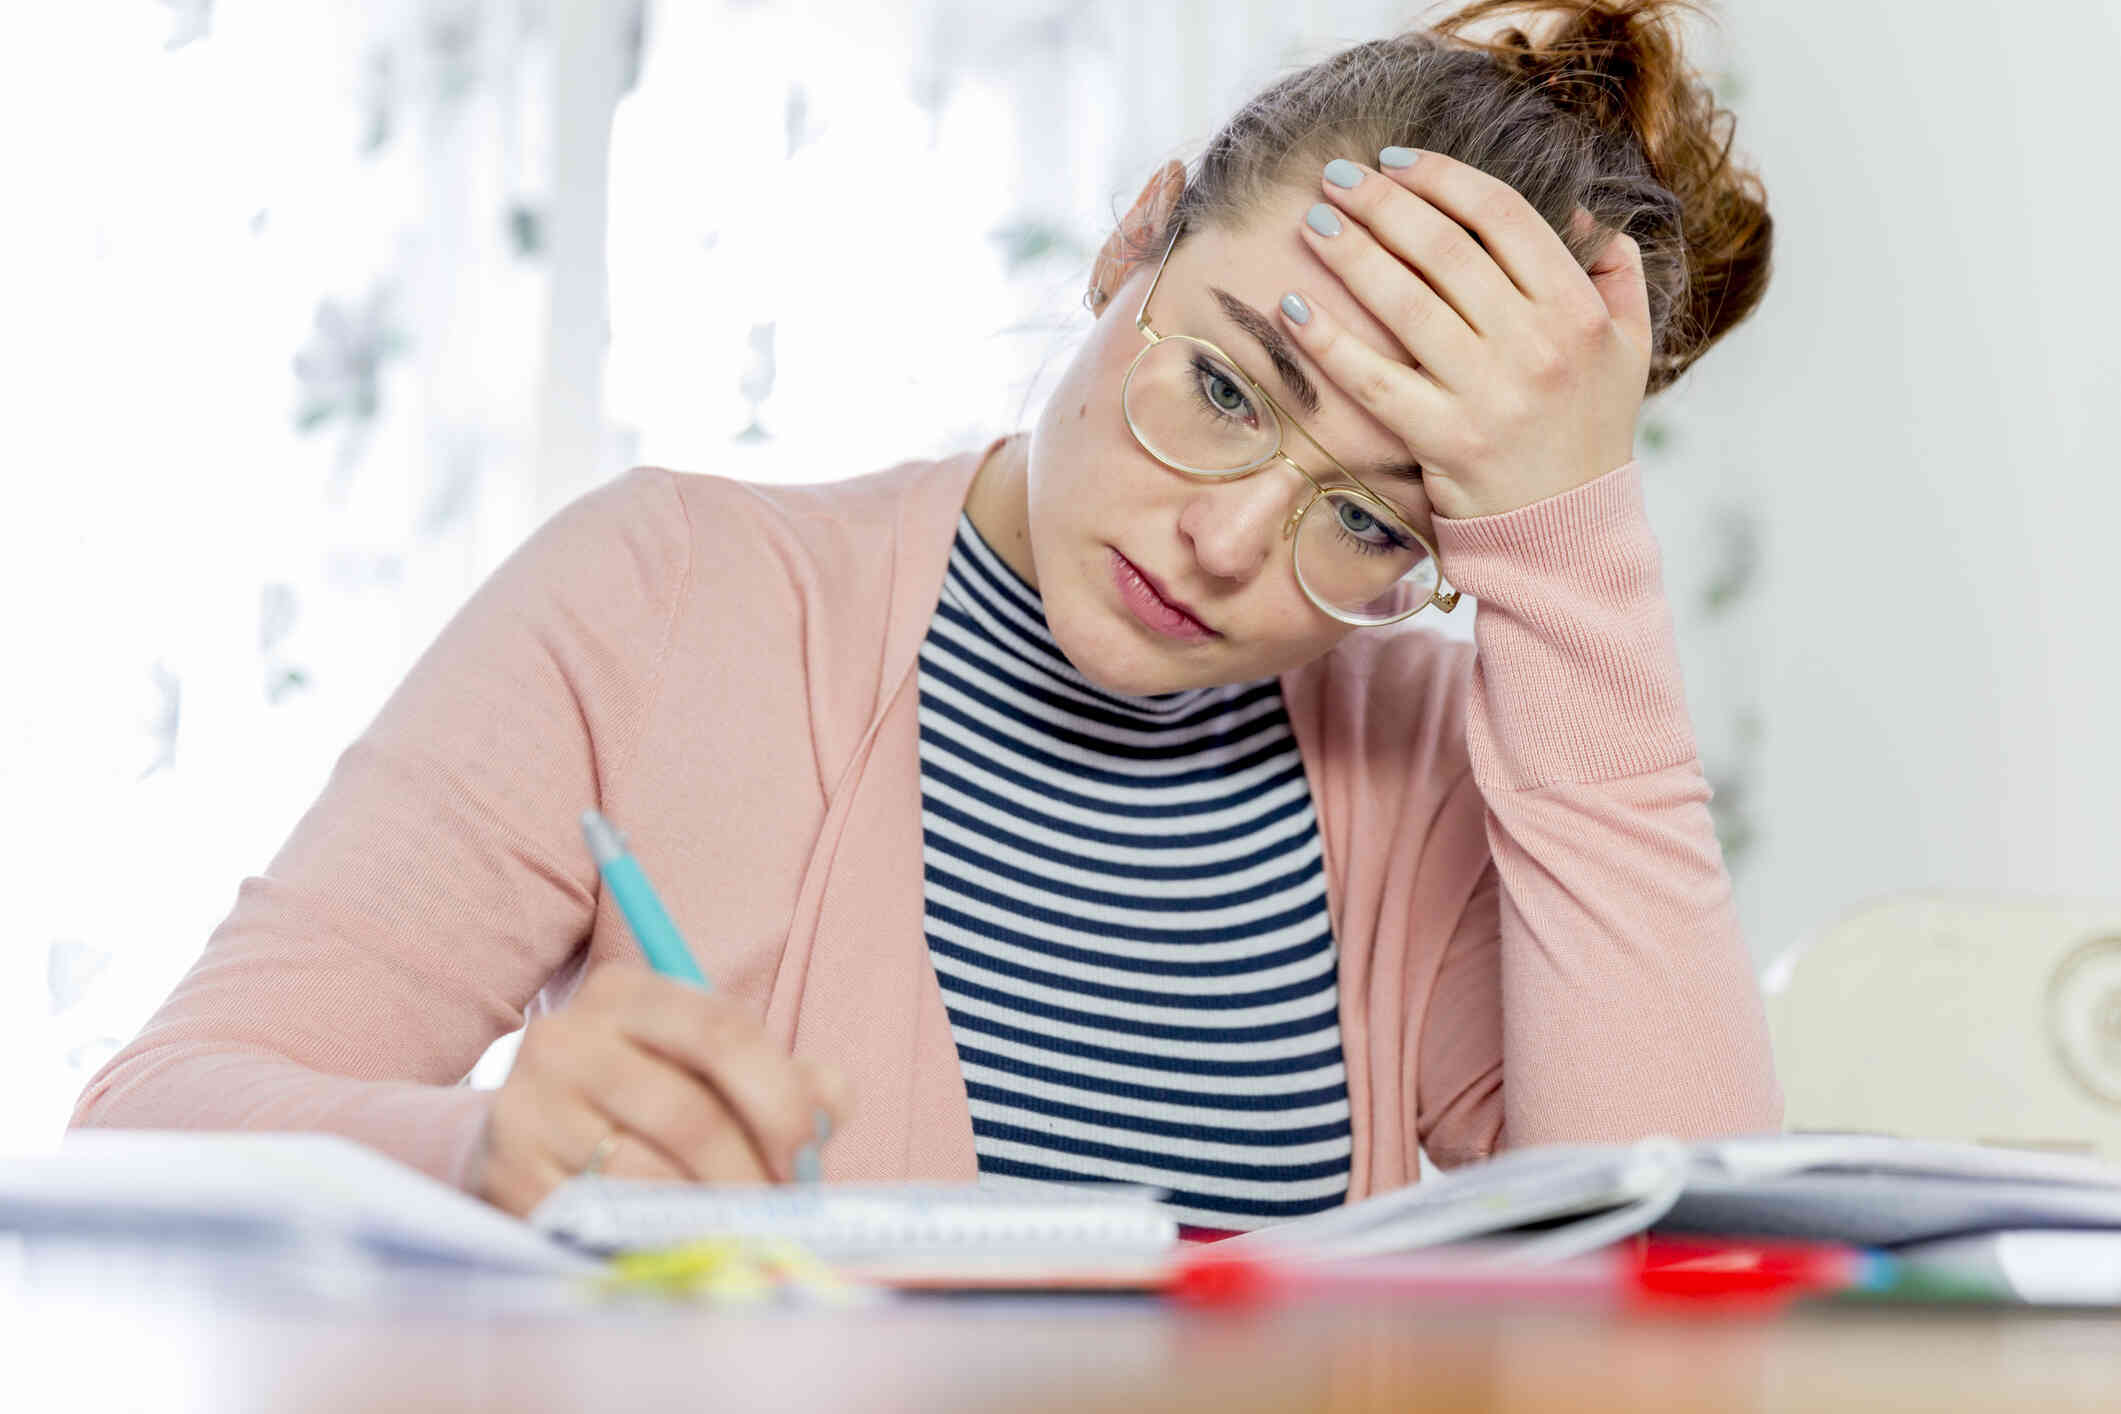 A woman wearing a pink cardigan sits at her desk at work with a worried expression while writting on some papers on the desk infront of her.